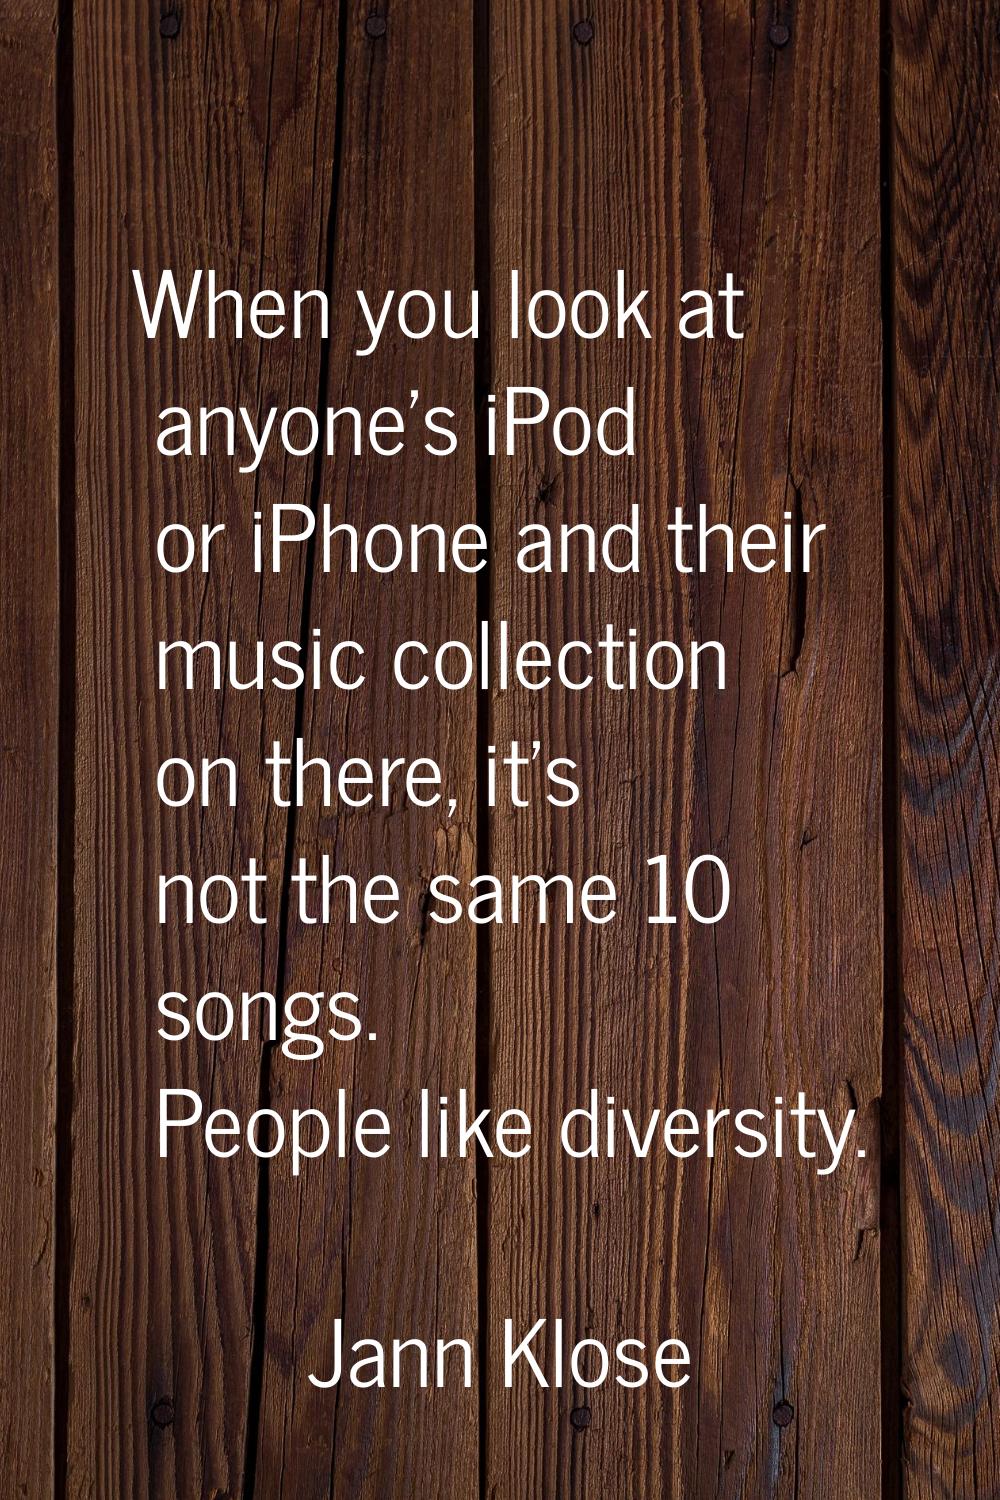 When you look at anyone's iPod or iPhone and their music collection on there, it's not the same 10 